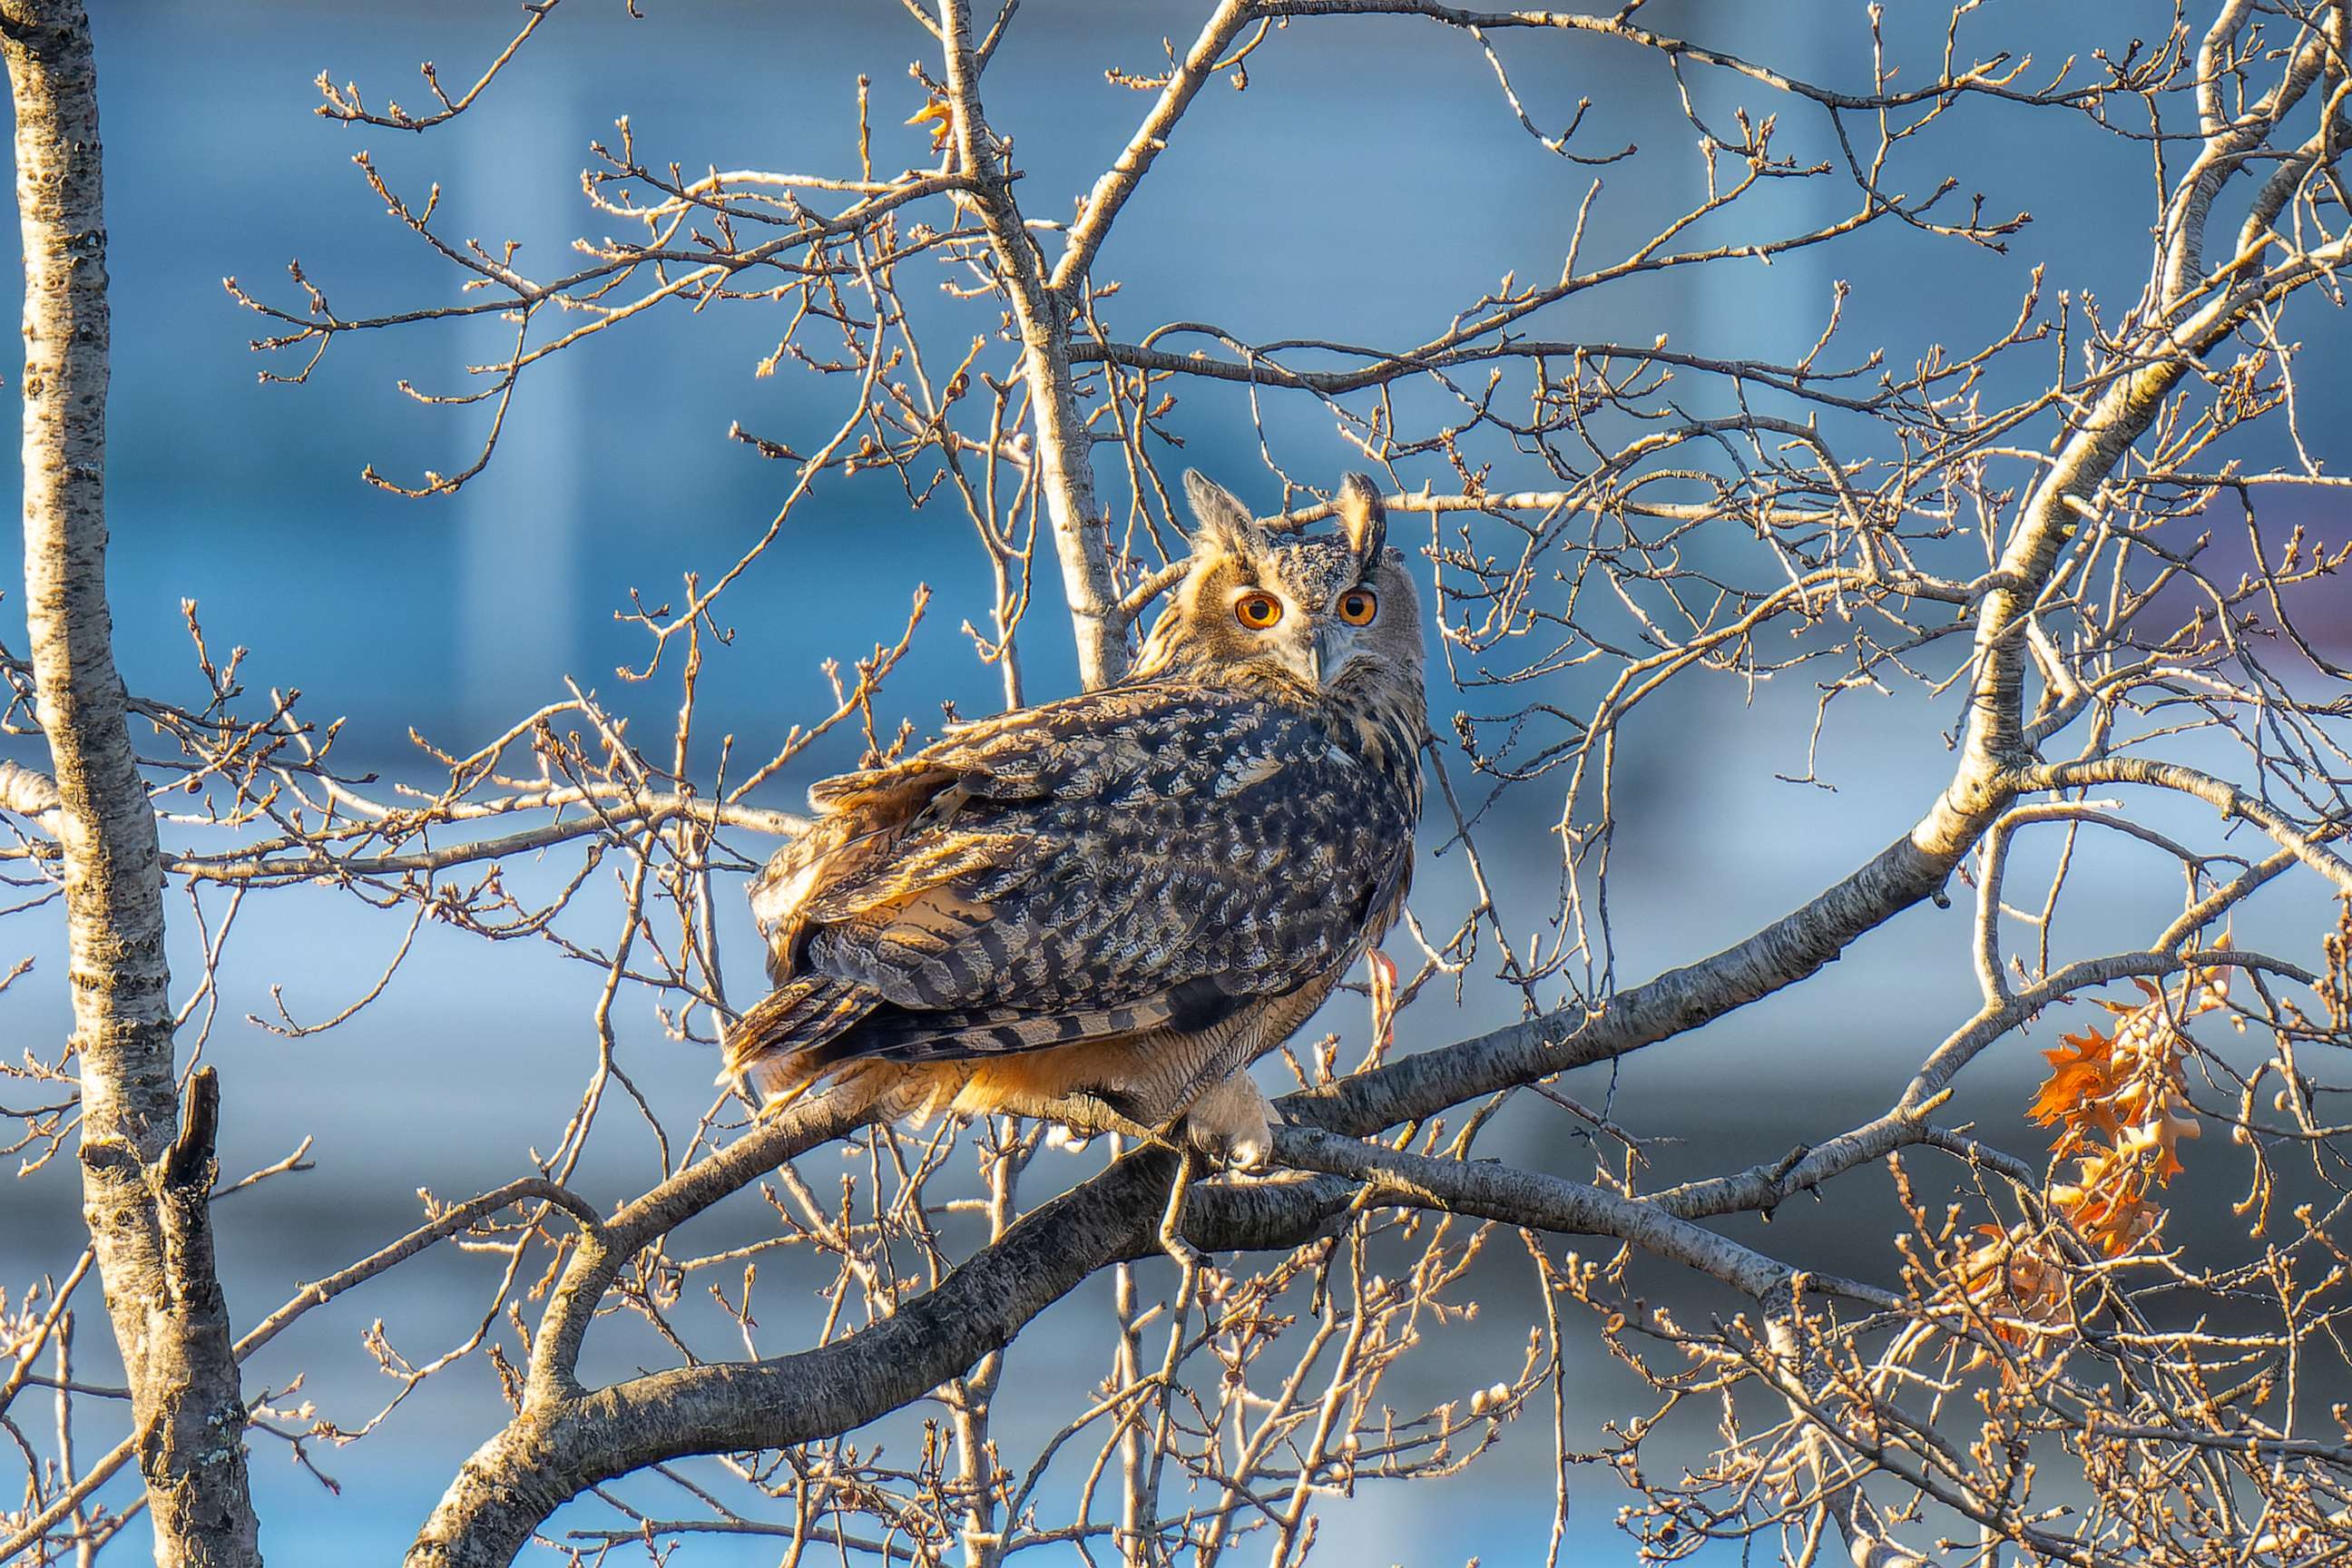 PHOTO: An owl that escaped from the Central Park Zoo, perches in a tree at Pulitzer Plaza outside the Plaza Hotel in New York City, Feb. 2, 2023.